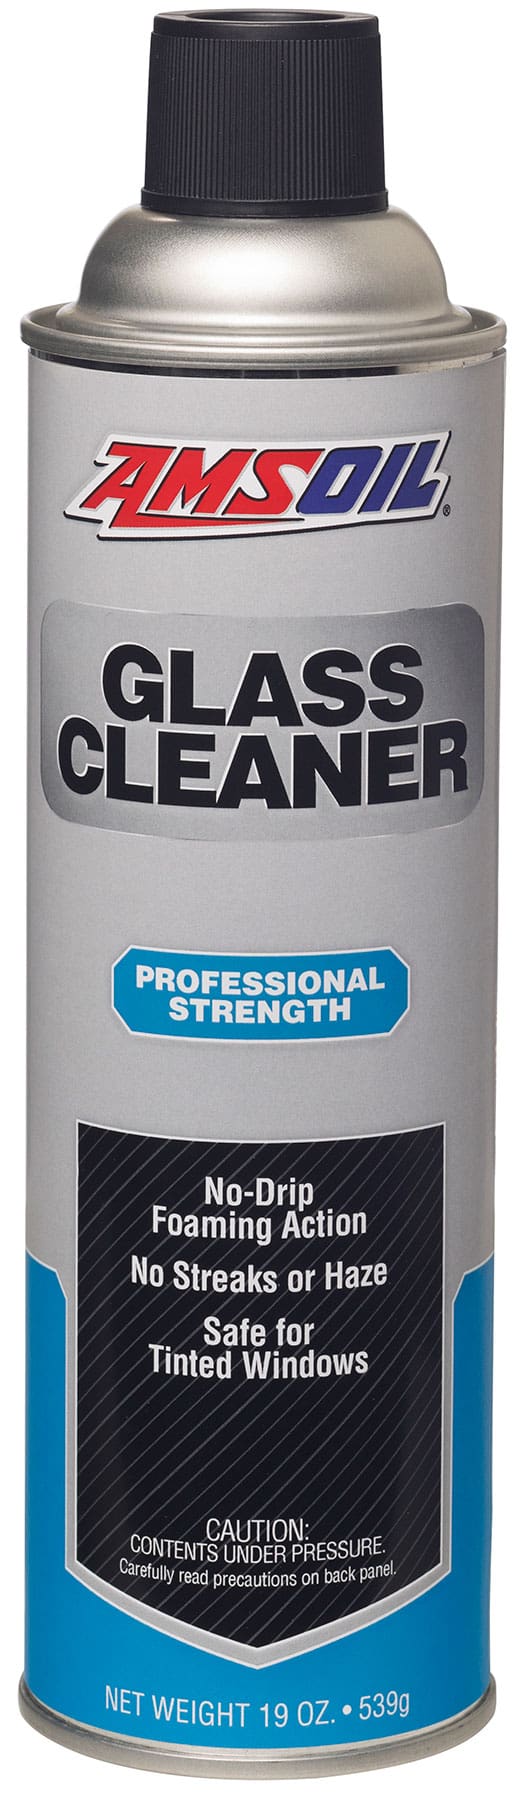 A can of AMSOIL Glass Cleaner, which provides a professional-strength formula that cuts through grease and grime faster than other leading glass cleaners.